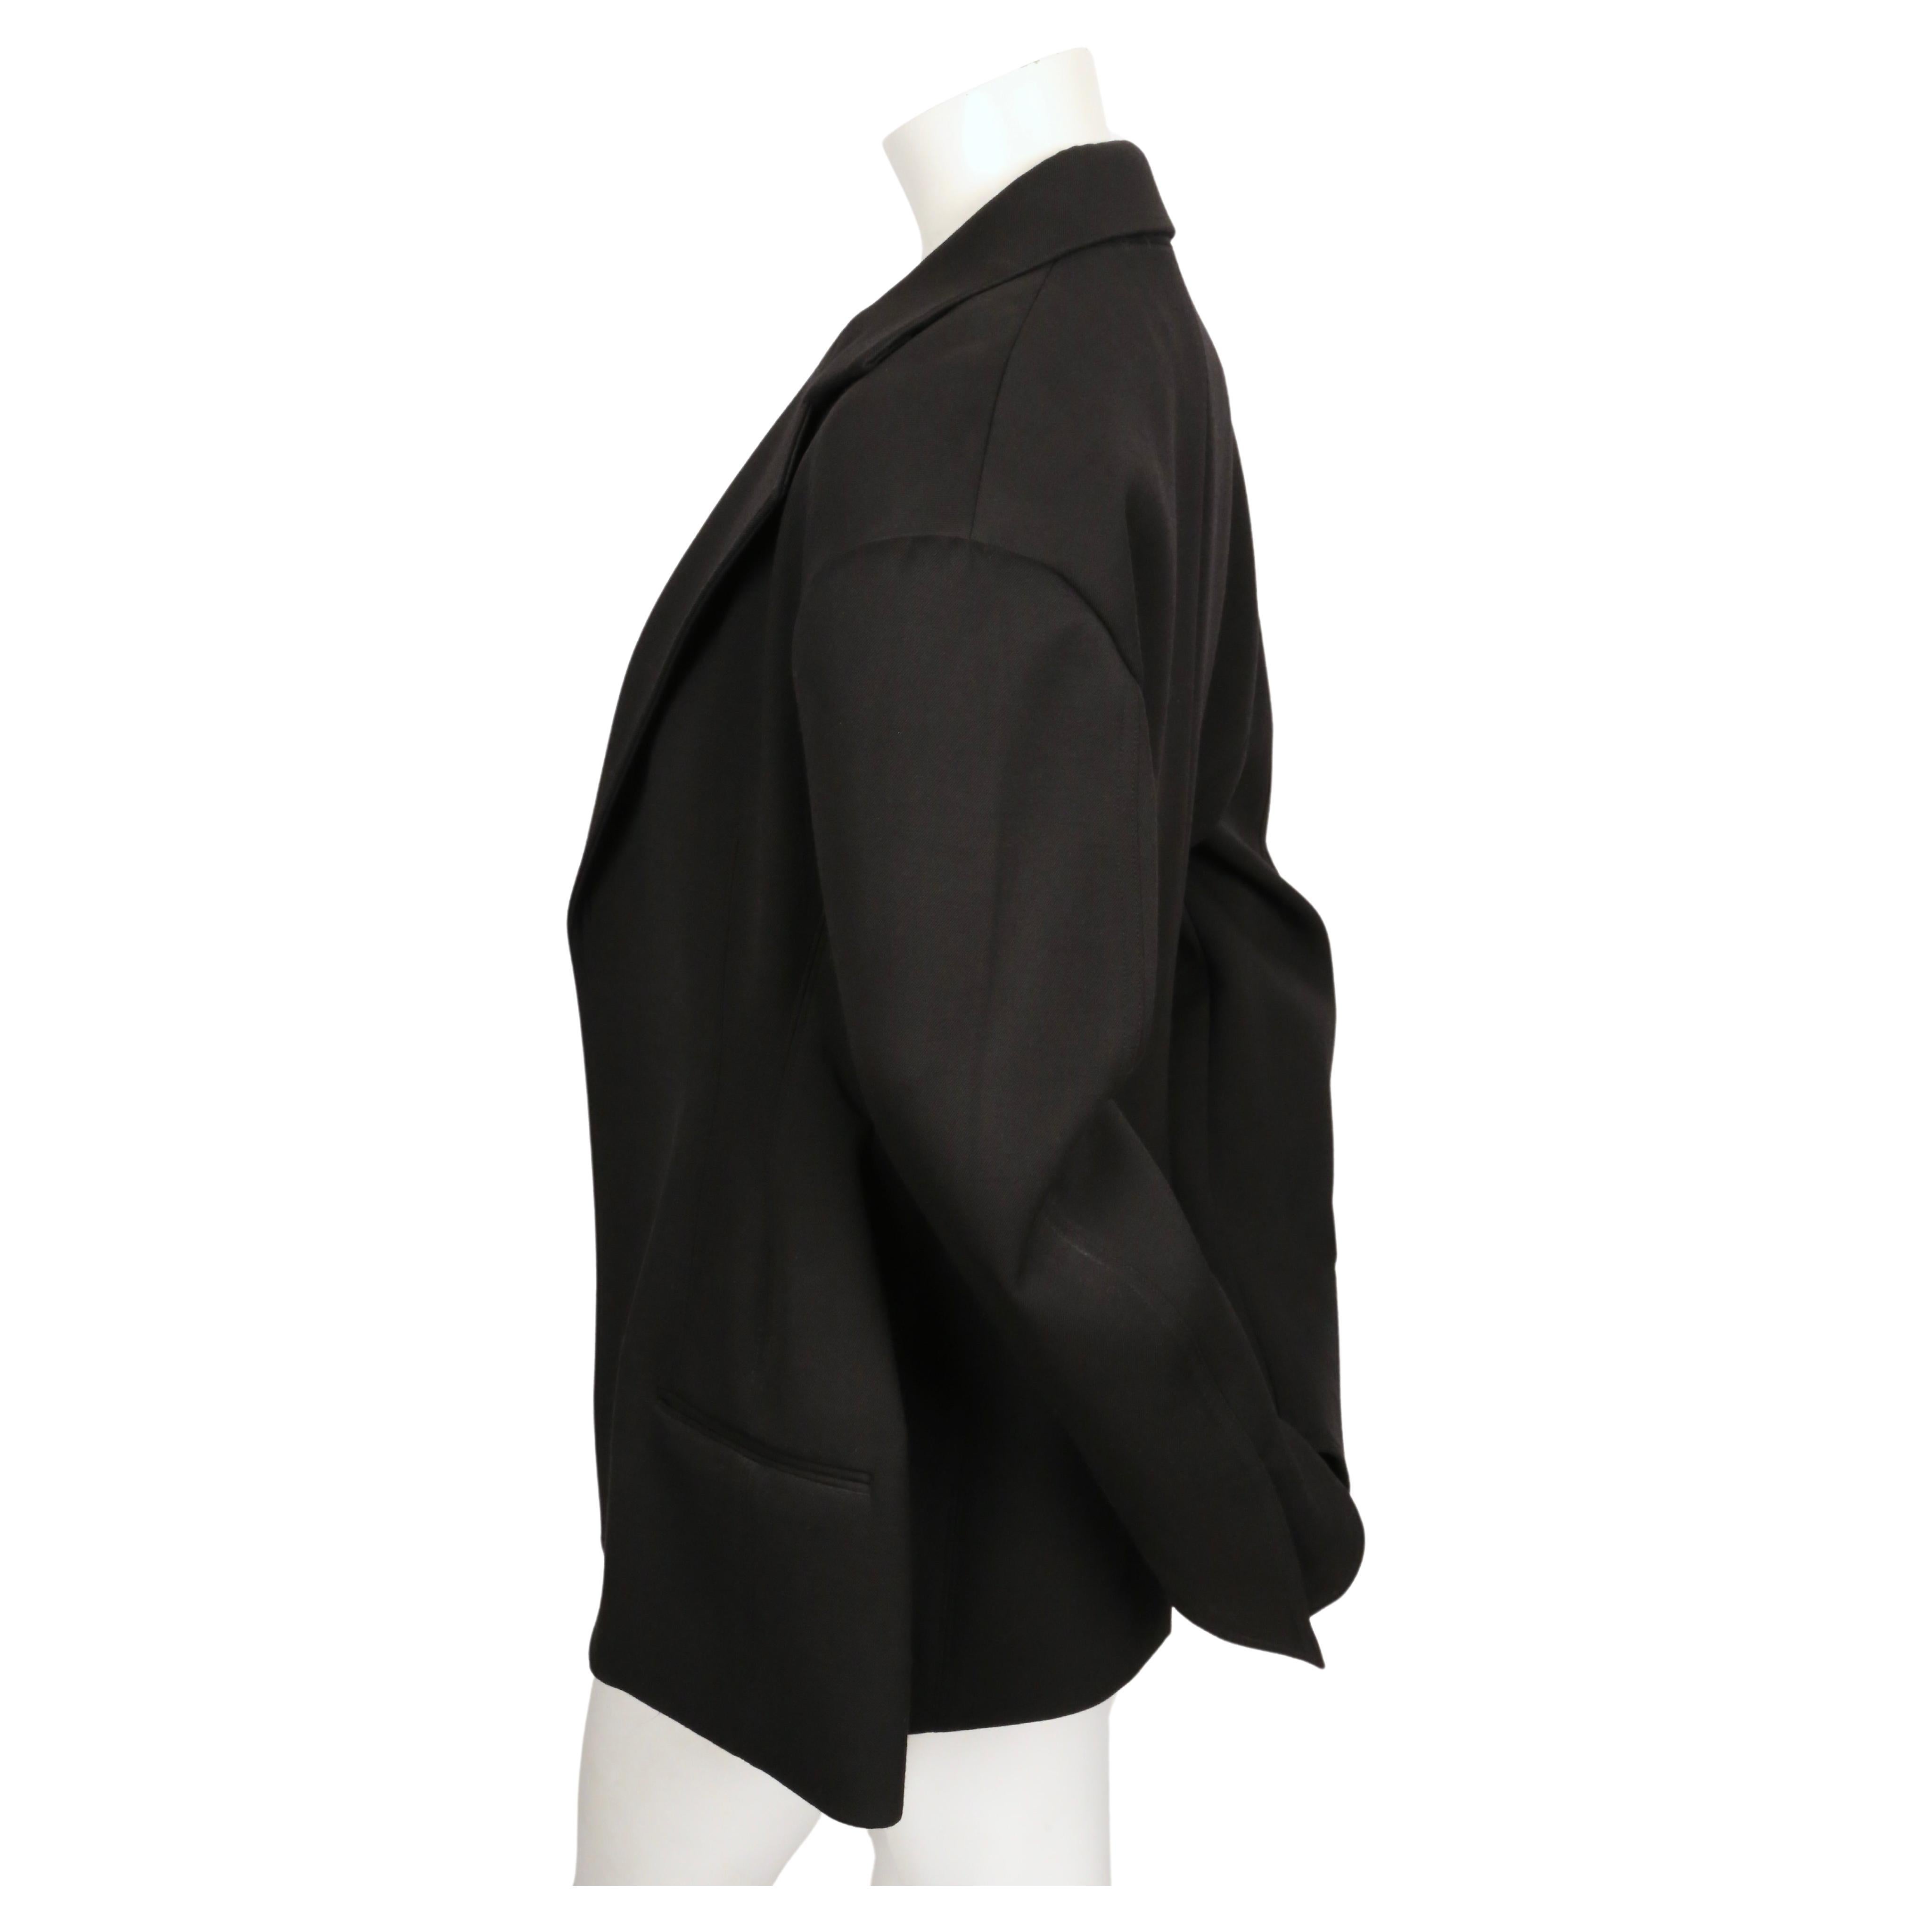 CELINE by PHOEBE PHILO black hourglass jacket resort 2016 In Good Condition In San Fransisco, CA